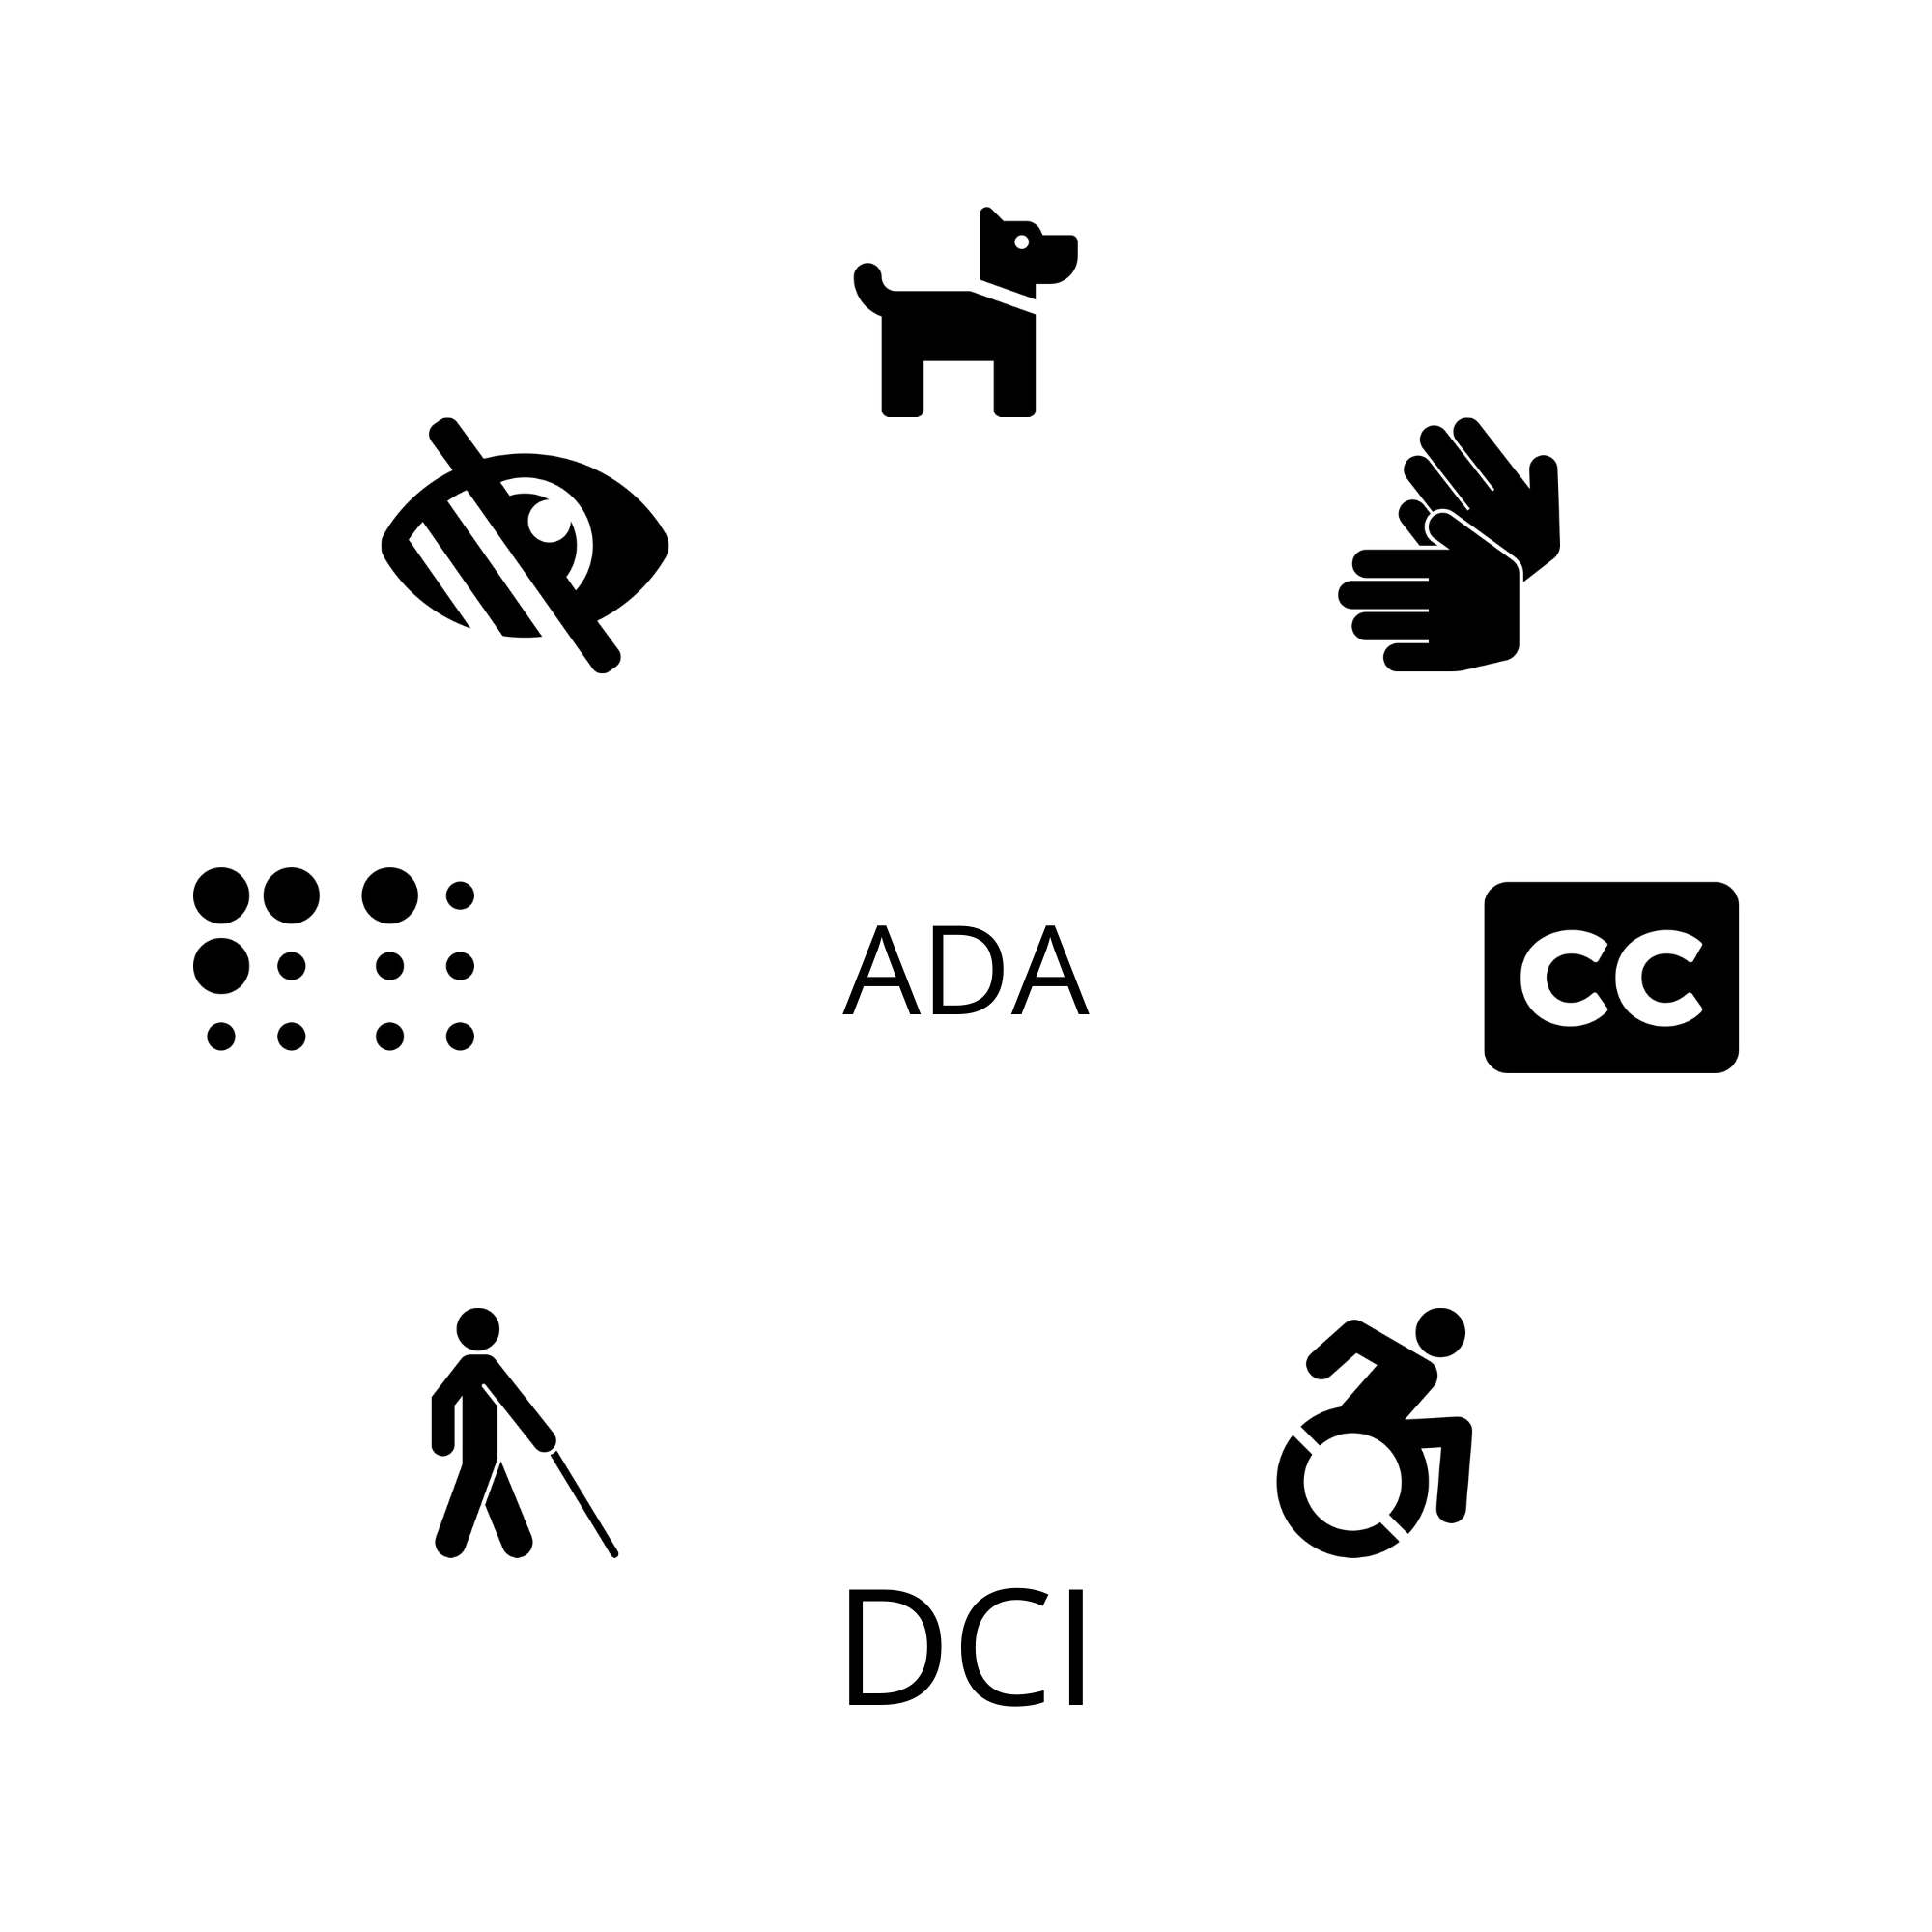 Icons related to disability circling the letters ADA